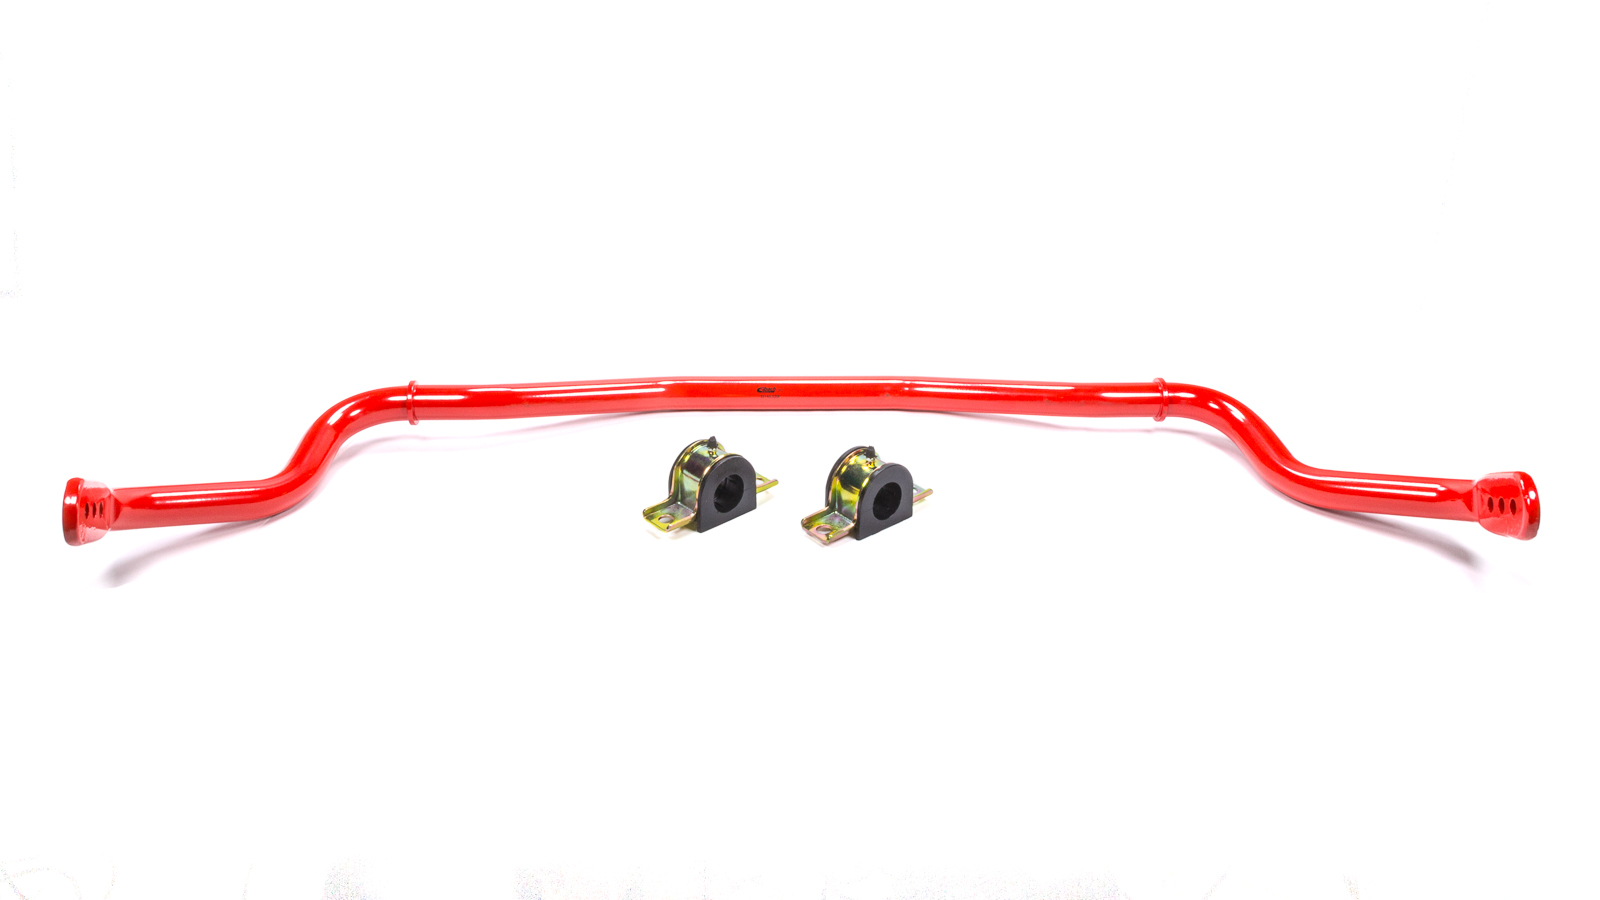 Eibach Springs Sway Bar, Anti-Roll, Front, Steel, Red Powder Coat, Ford Mustang 2015-16, Kit